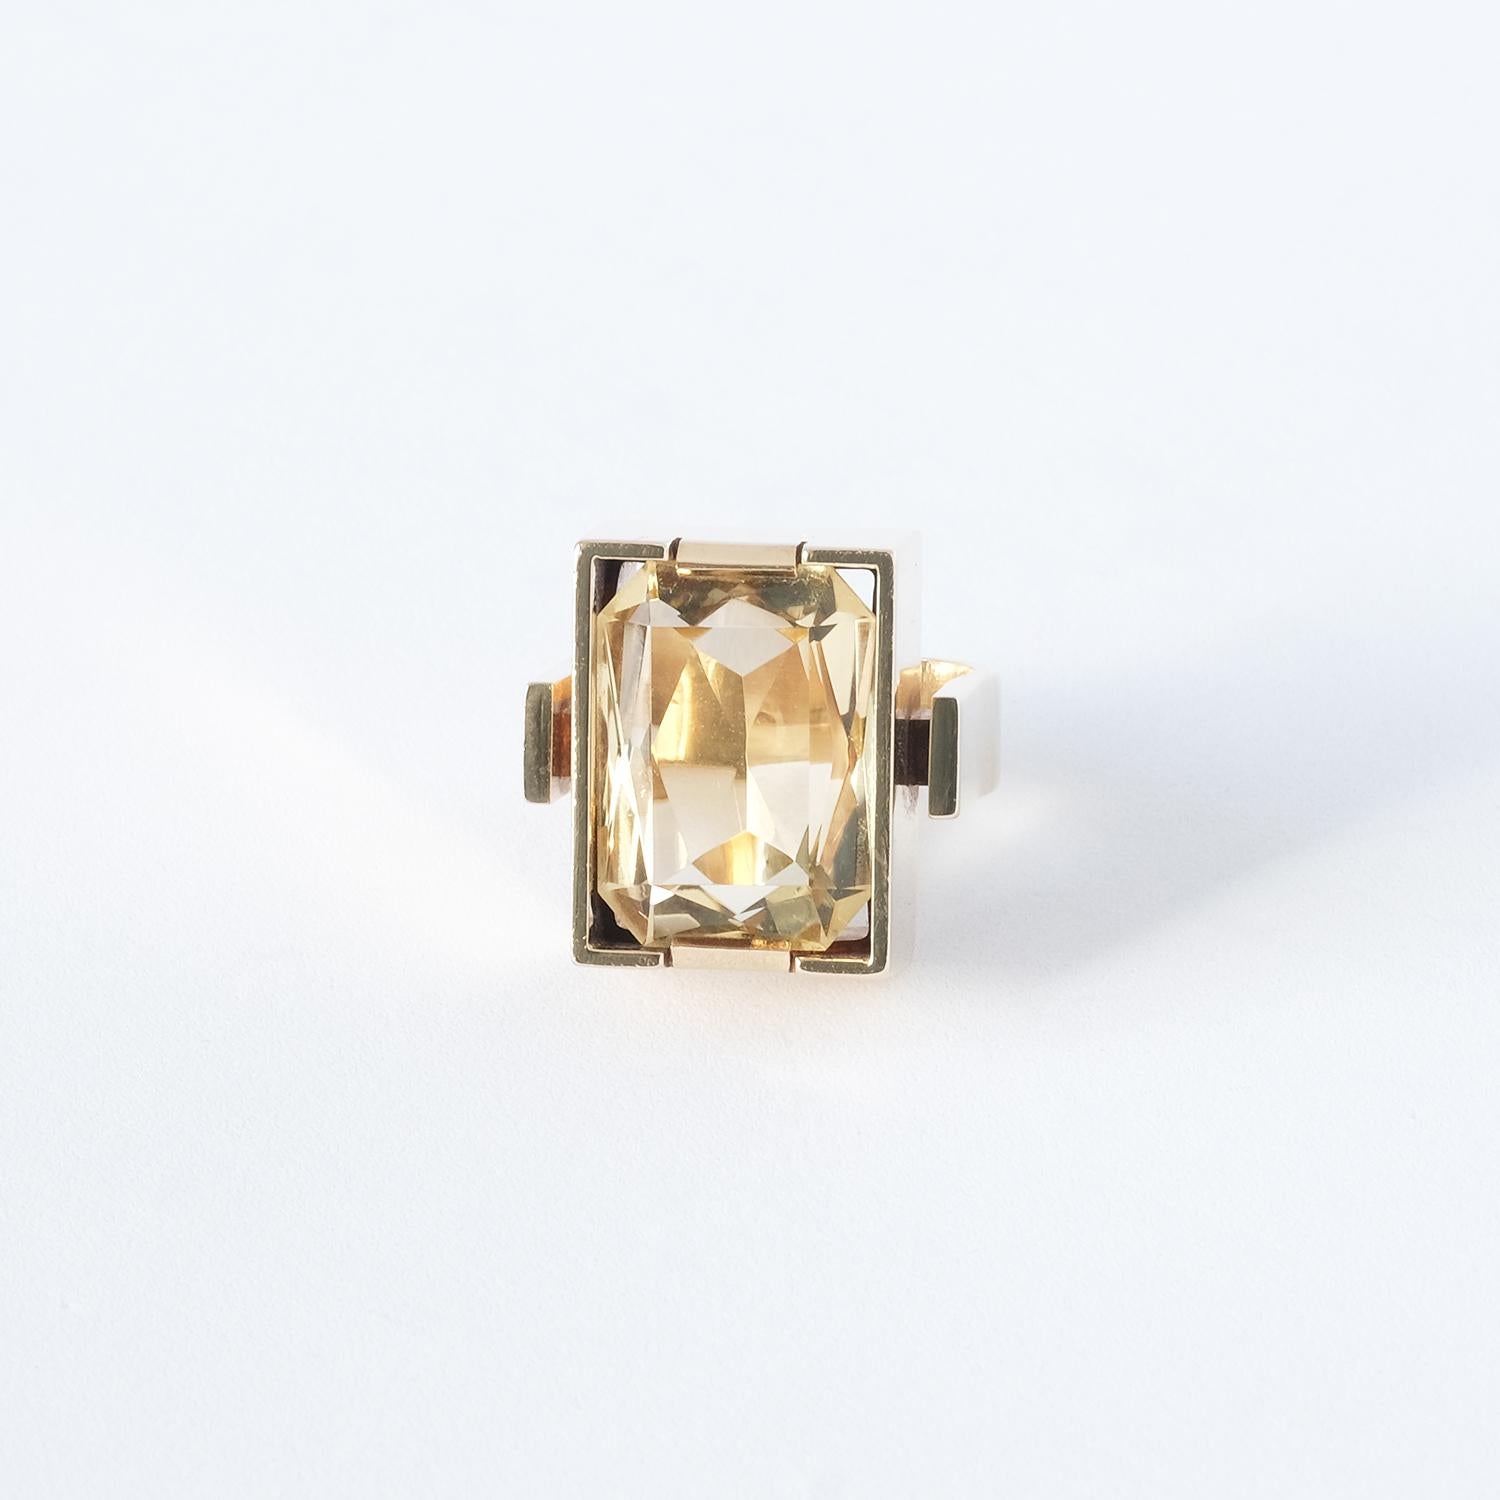 This 14 karat gold ring has a large, octagonal cut citrine which is placed in a rectangular chest shaped setting. The ring's wide and prominent shaft gives it a luxurious and interesting appearance.

The ring radiates strength and attitude and is